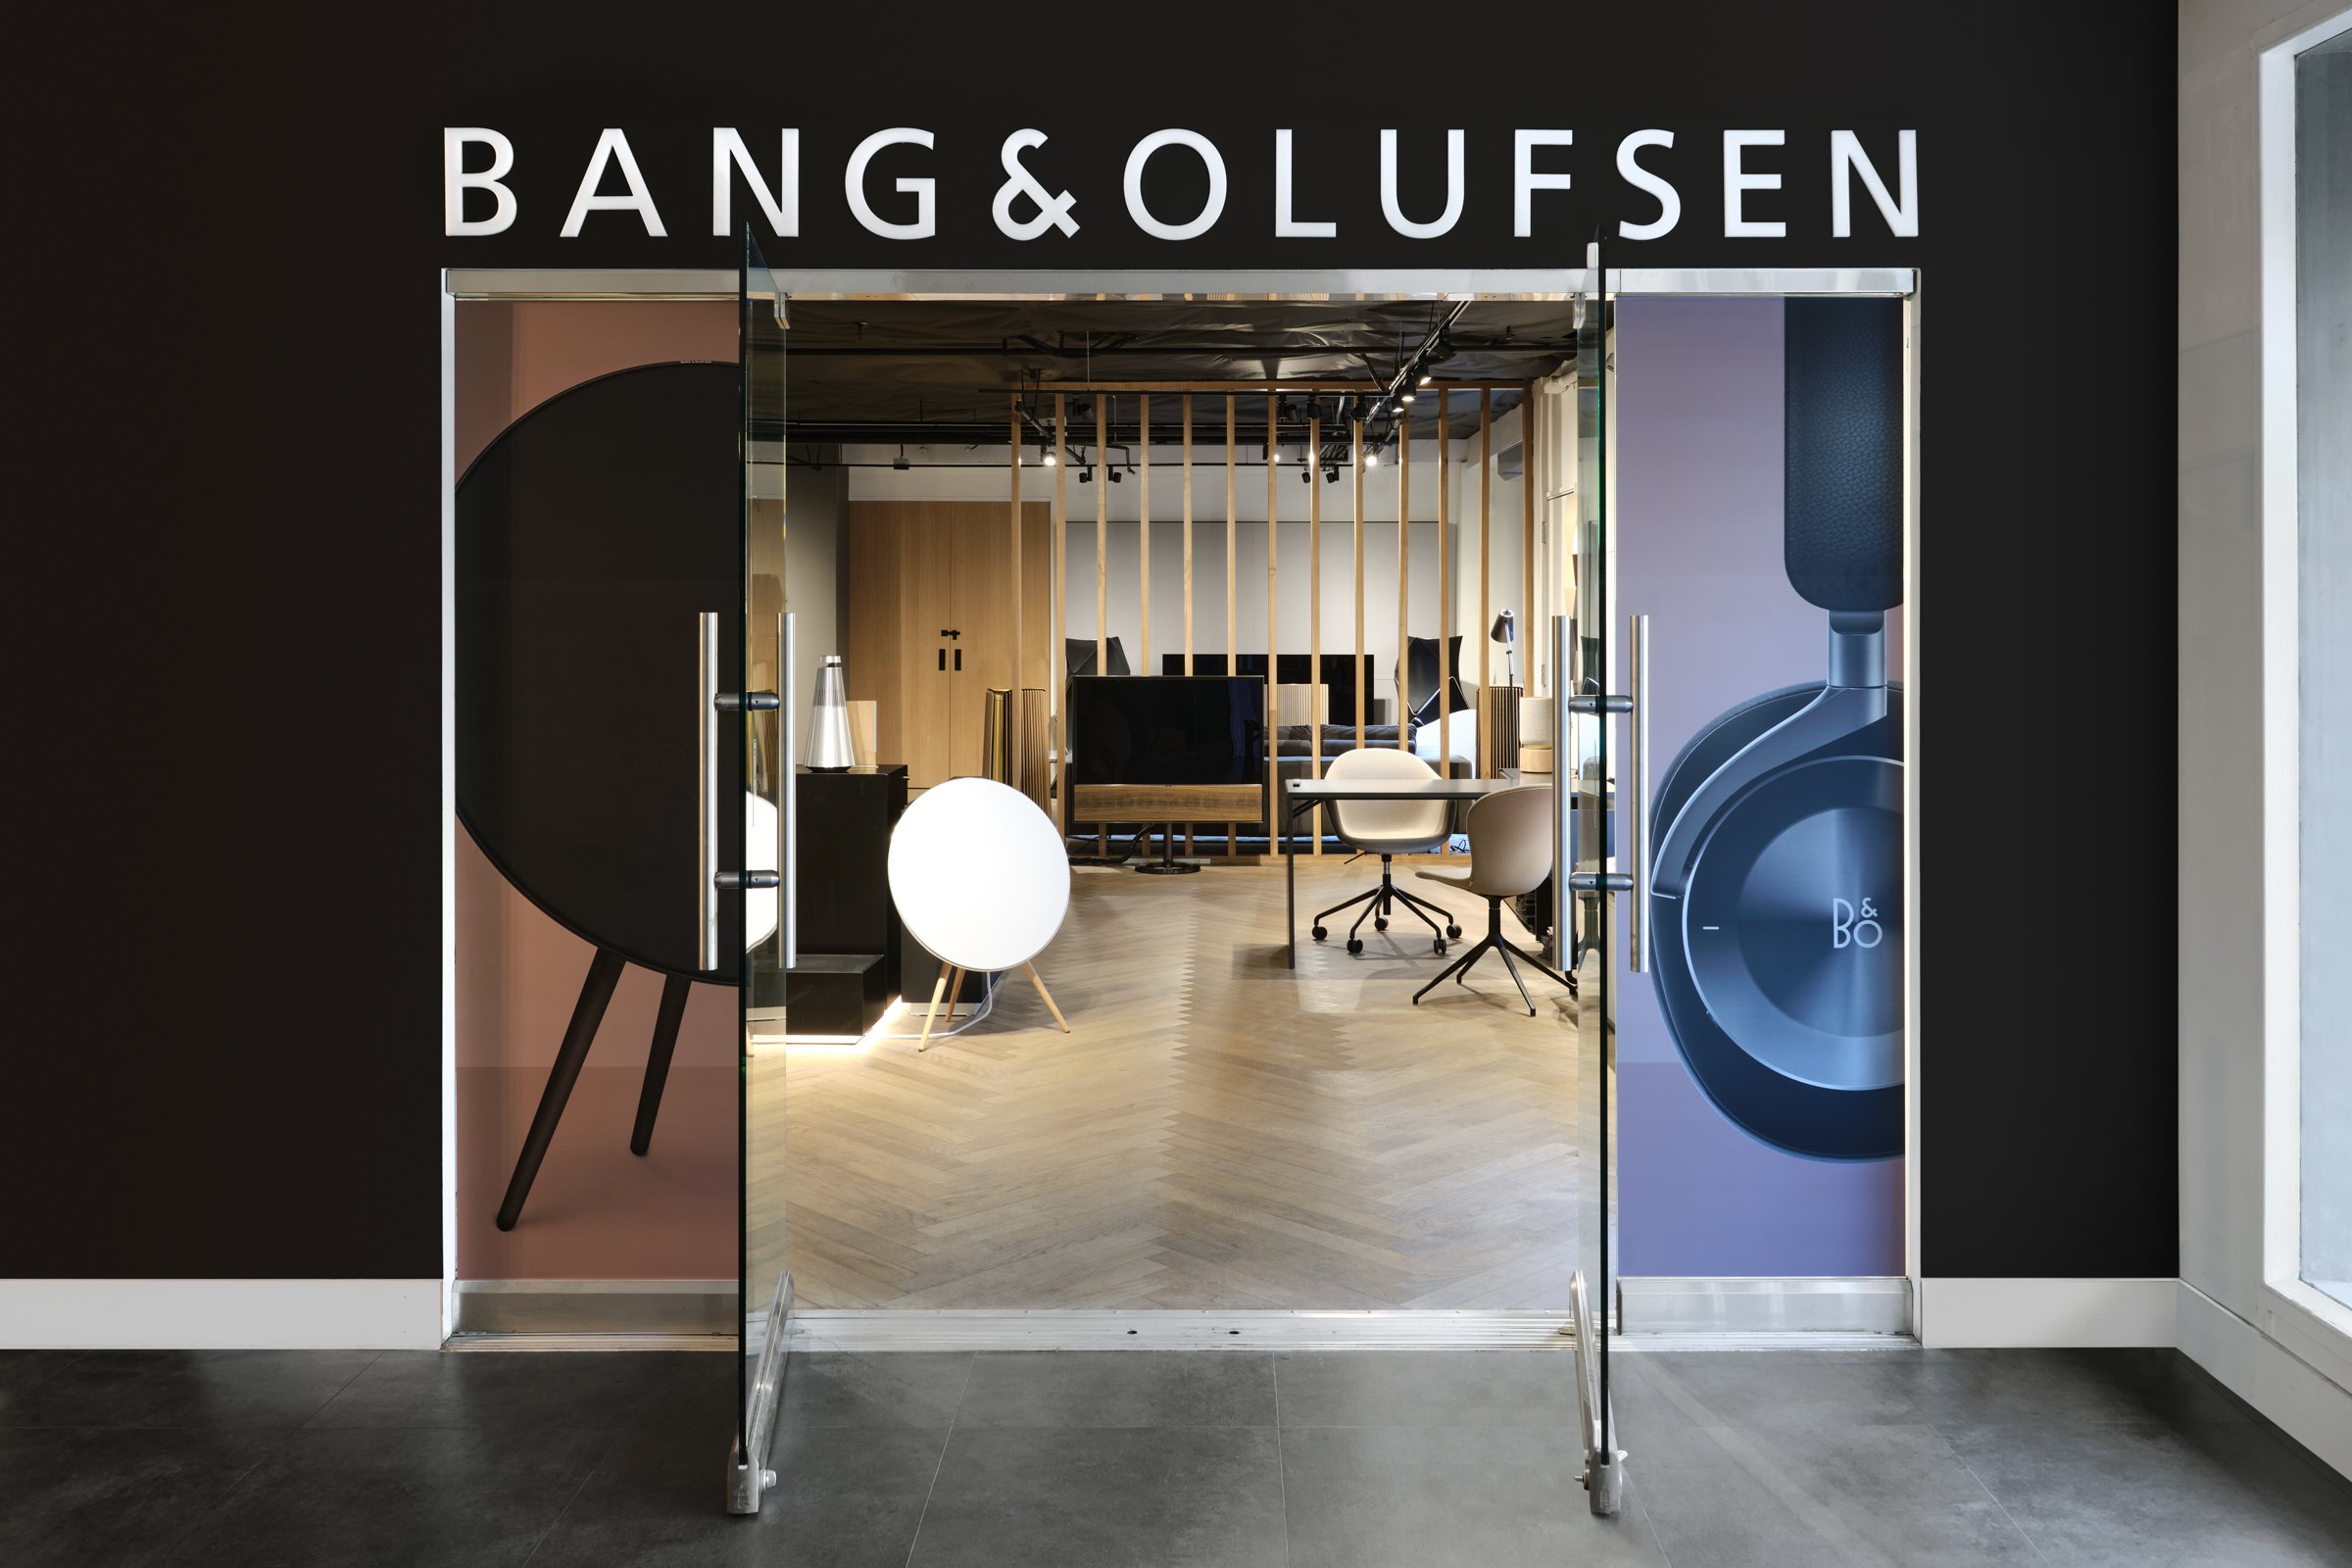 Bang & Olufsen San Francisco: High End Televisions, Sound Systems,  Loudspeakers